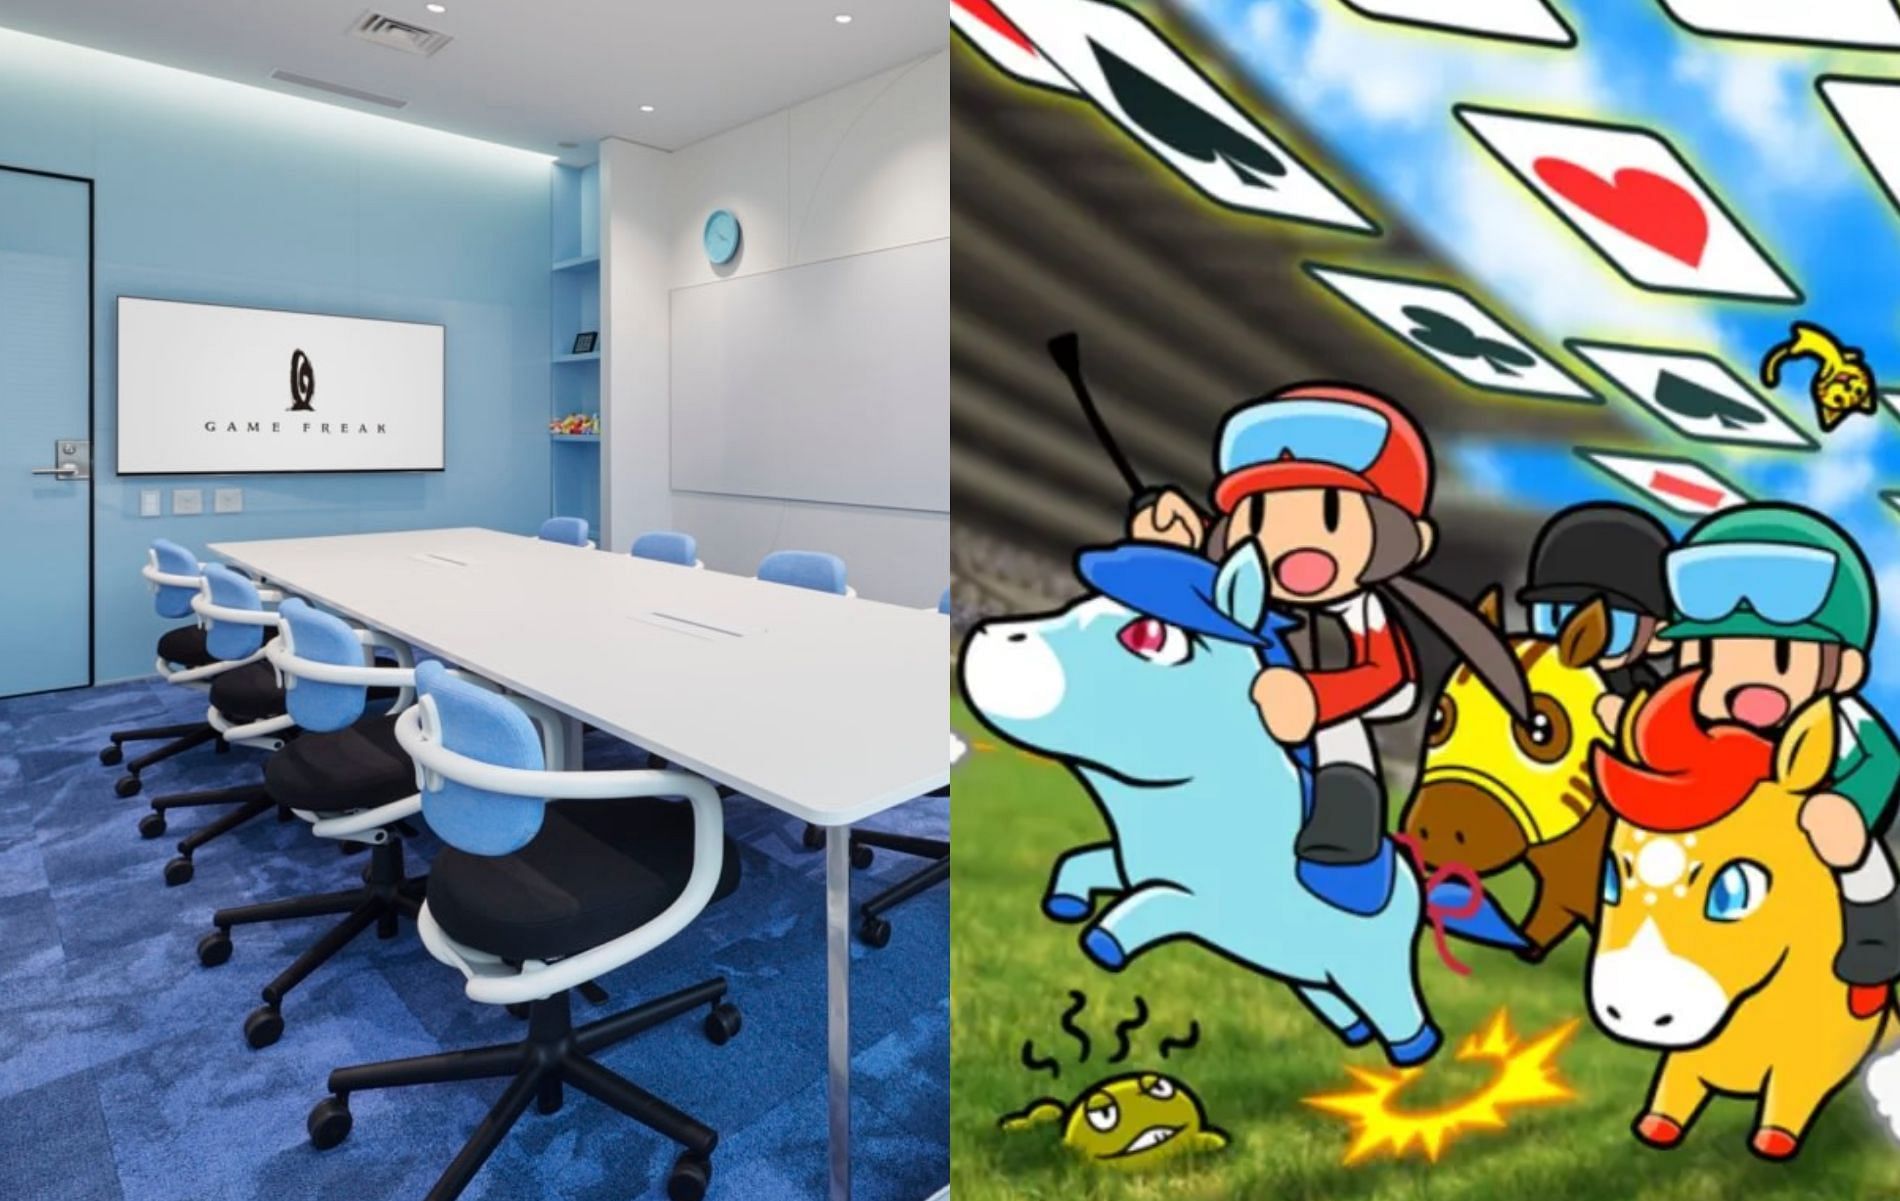 The Pokemon series creator wil ontinue developing unique titles for a wide range of non-Nintendo platforms (Images via Game Freak)